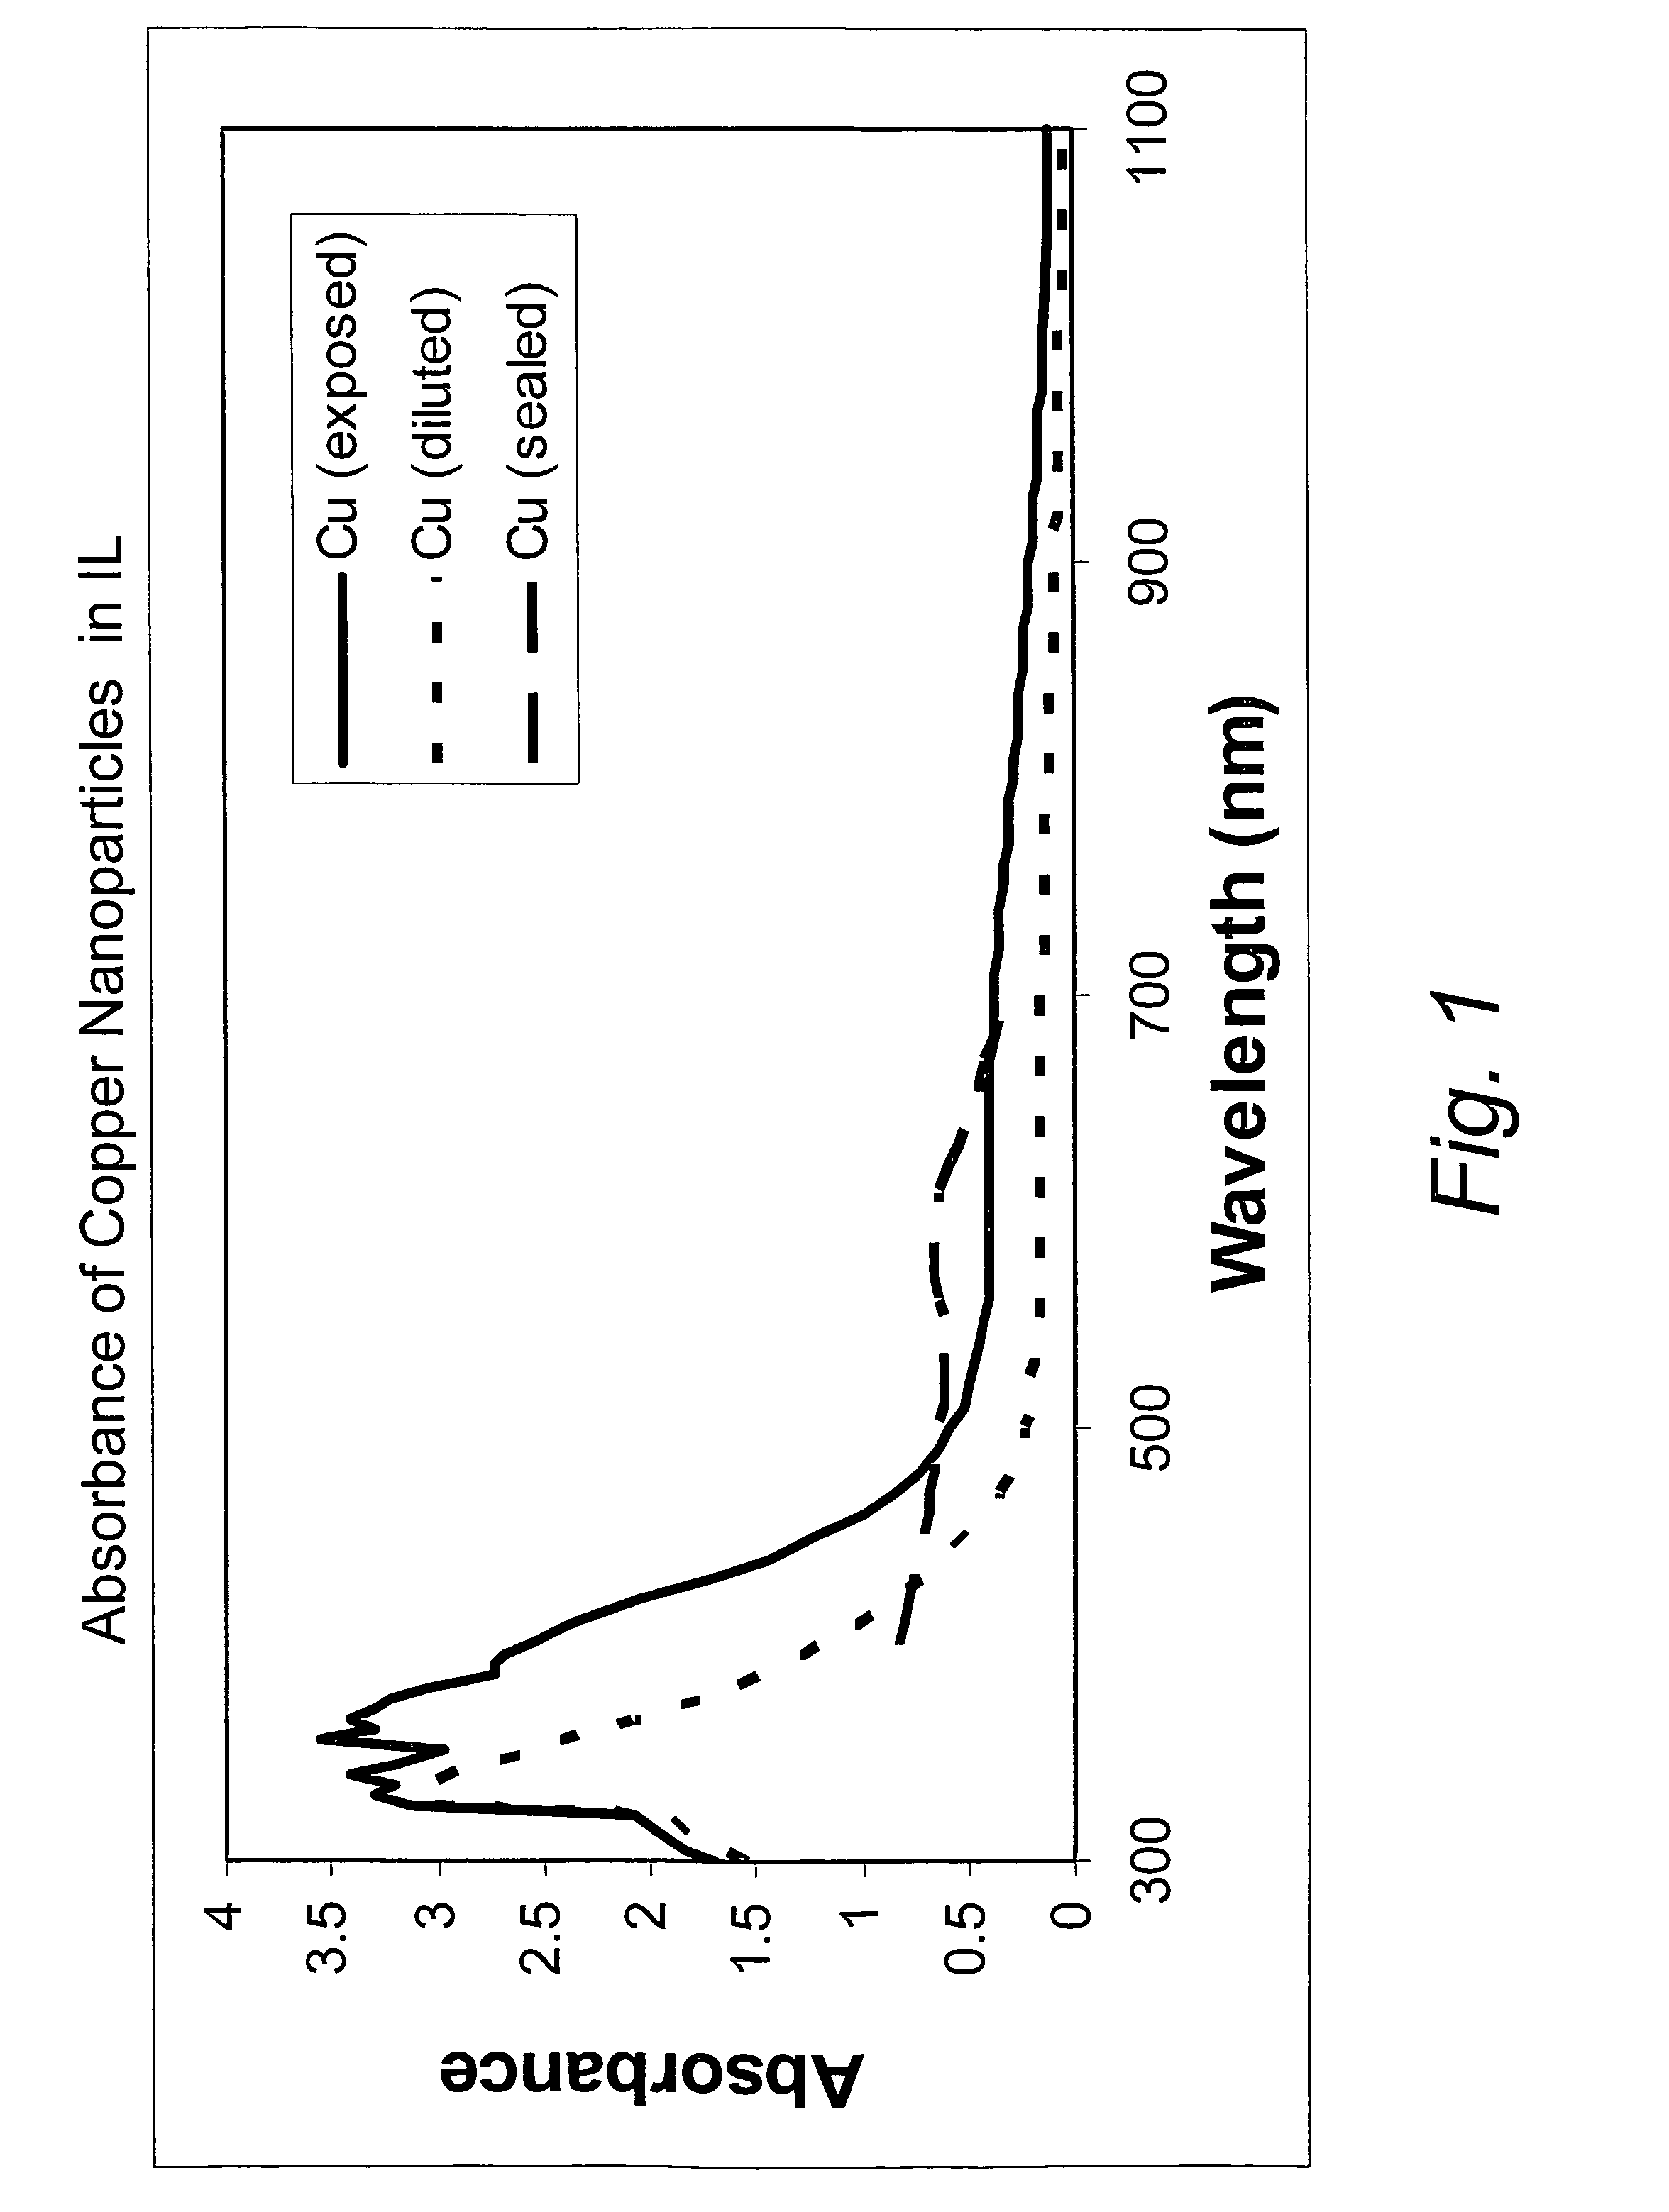 Method of producing particles by physical vapor deposition in an ionic liquid